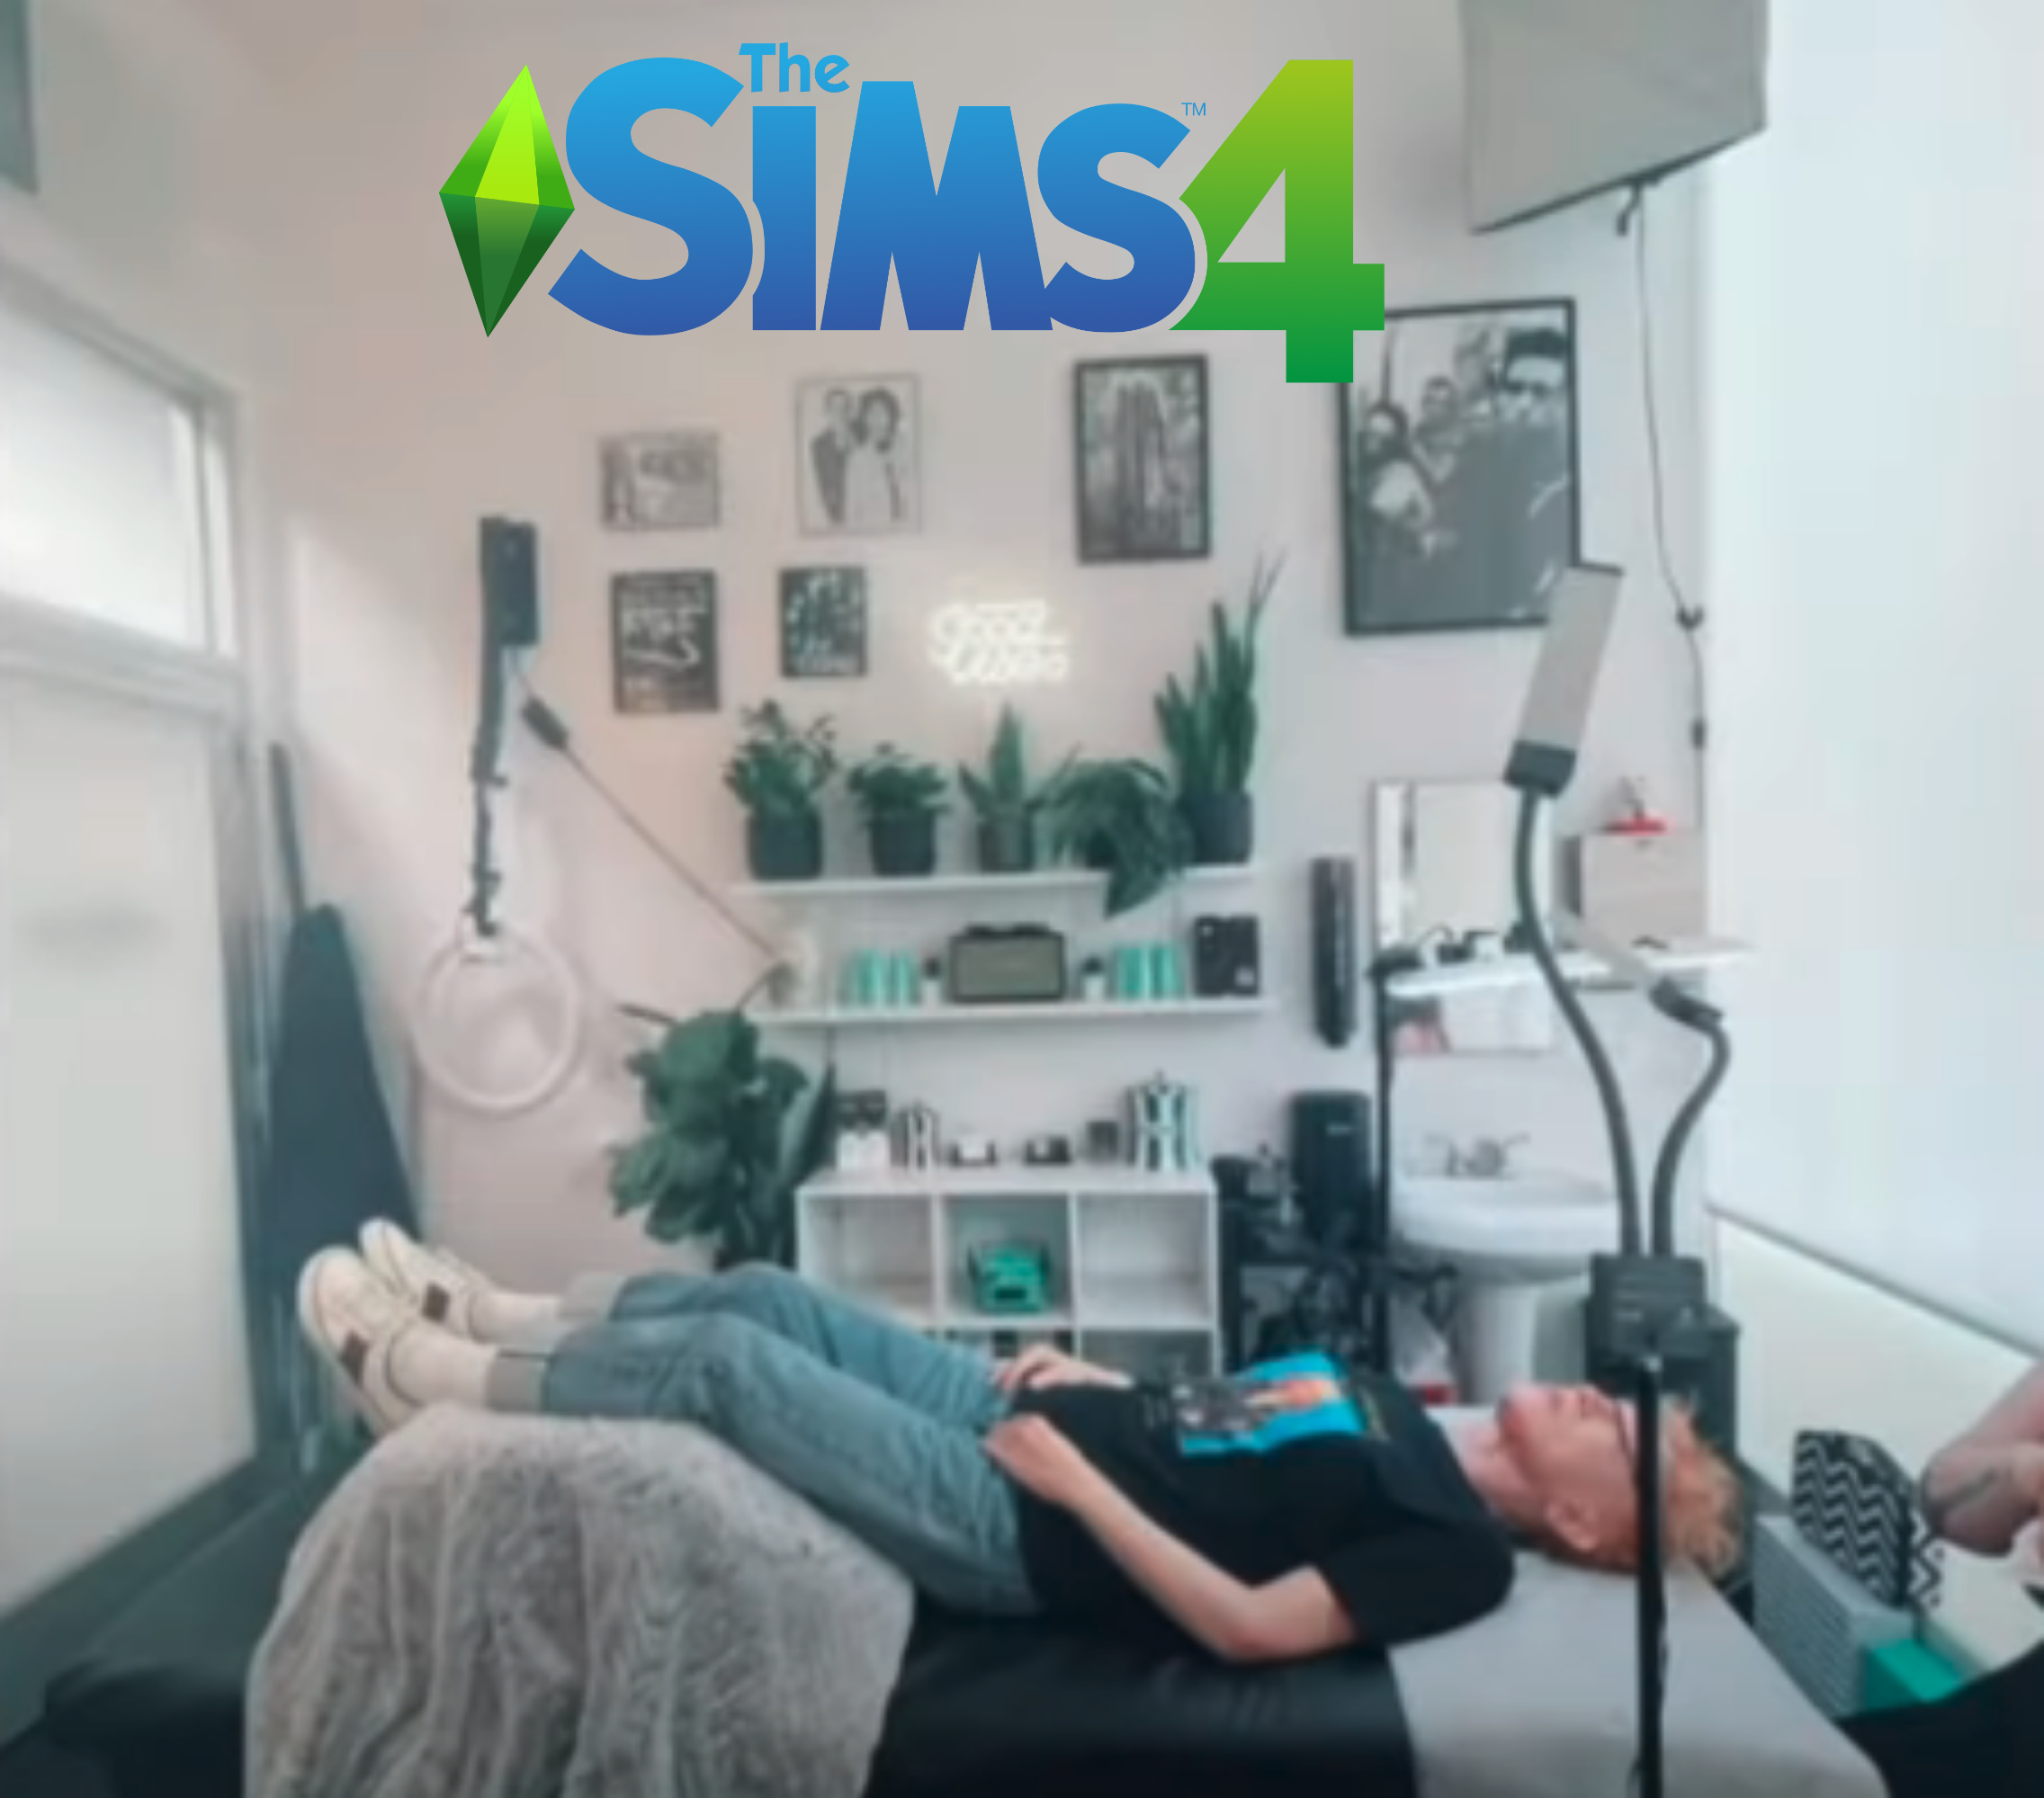 her lying on a table and a sims logo added to the photo